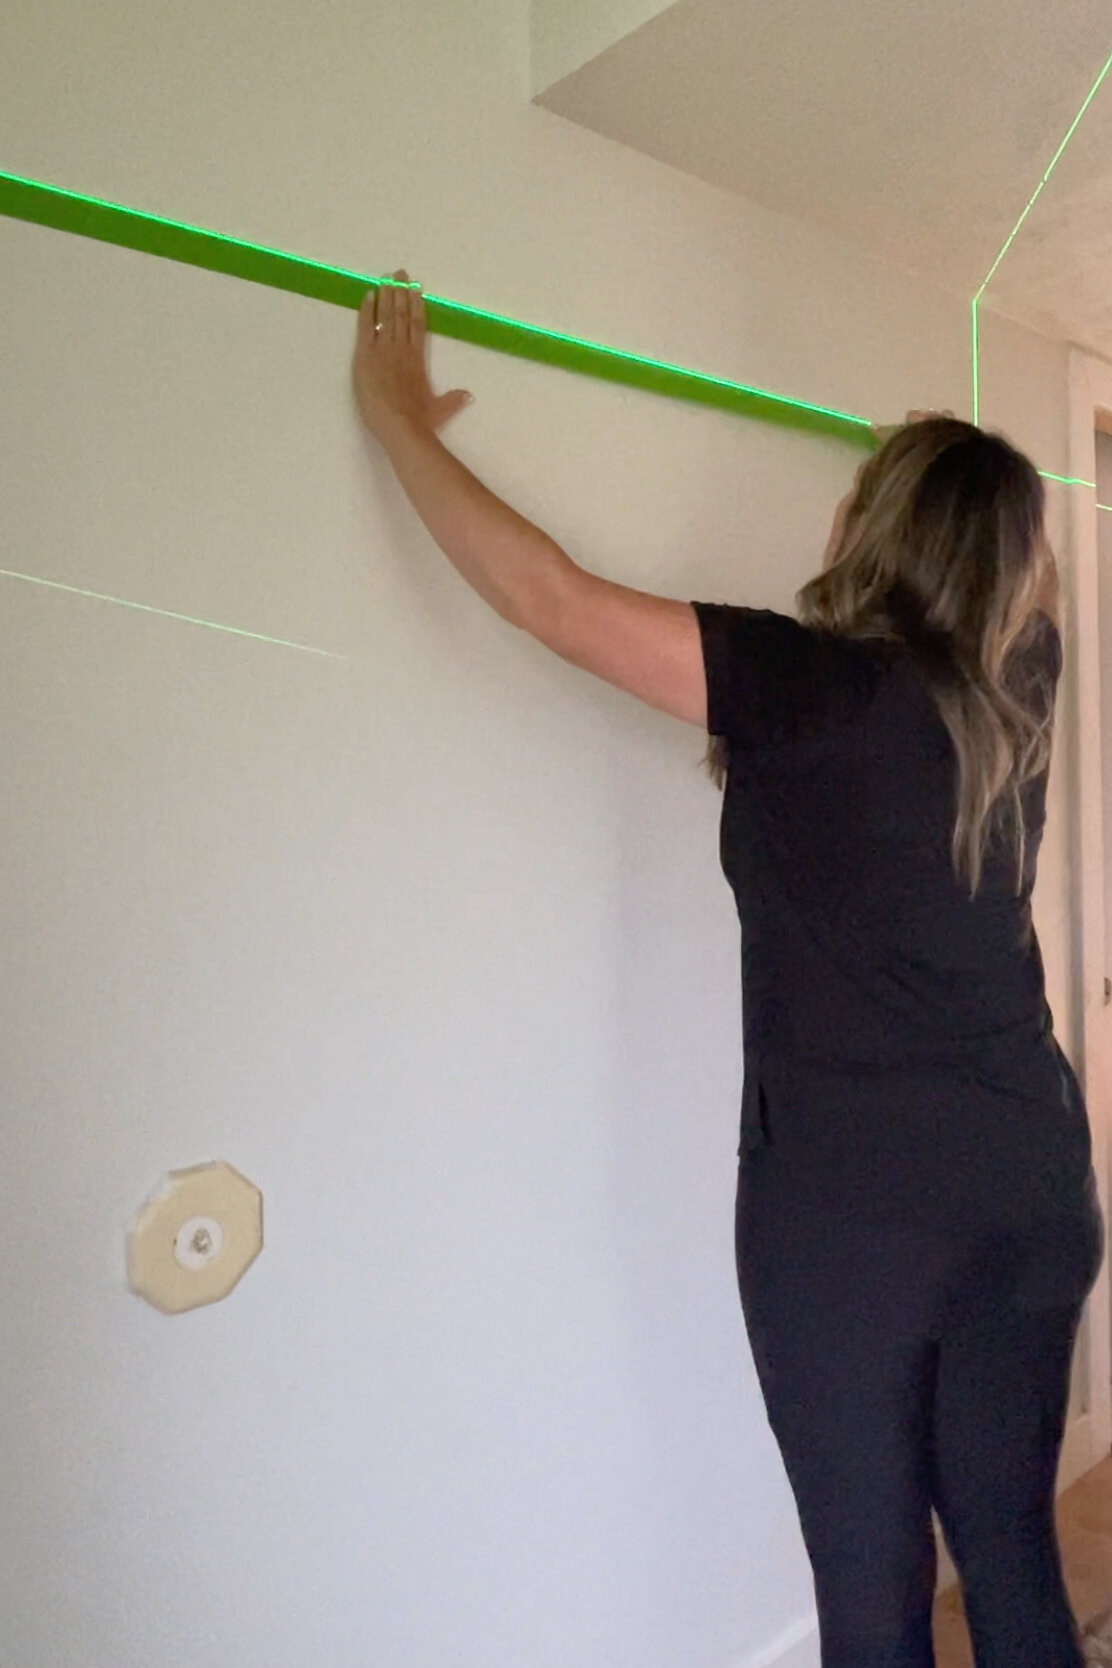 Using painters tape to plan a gallery wall layout.